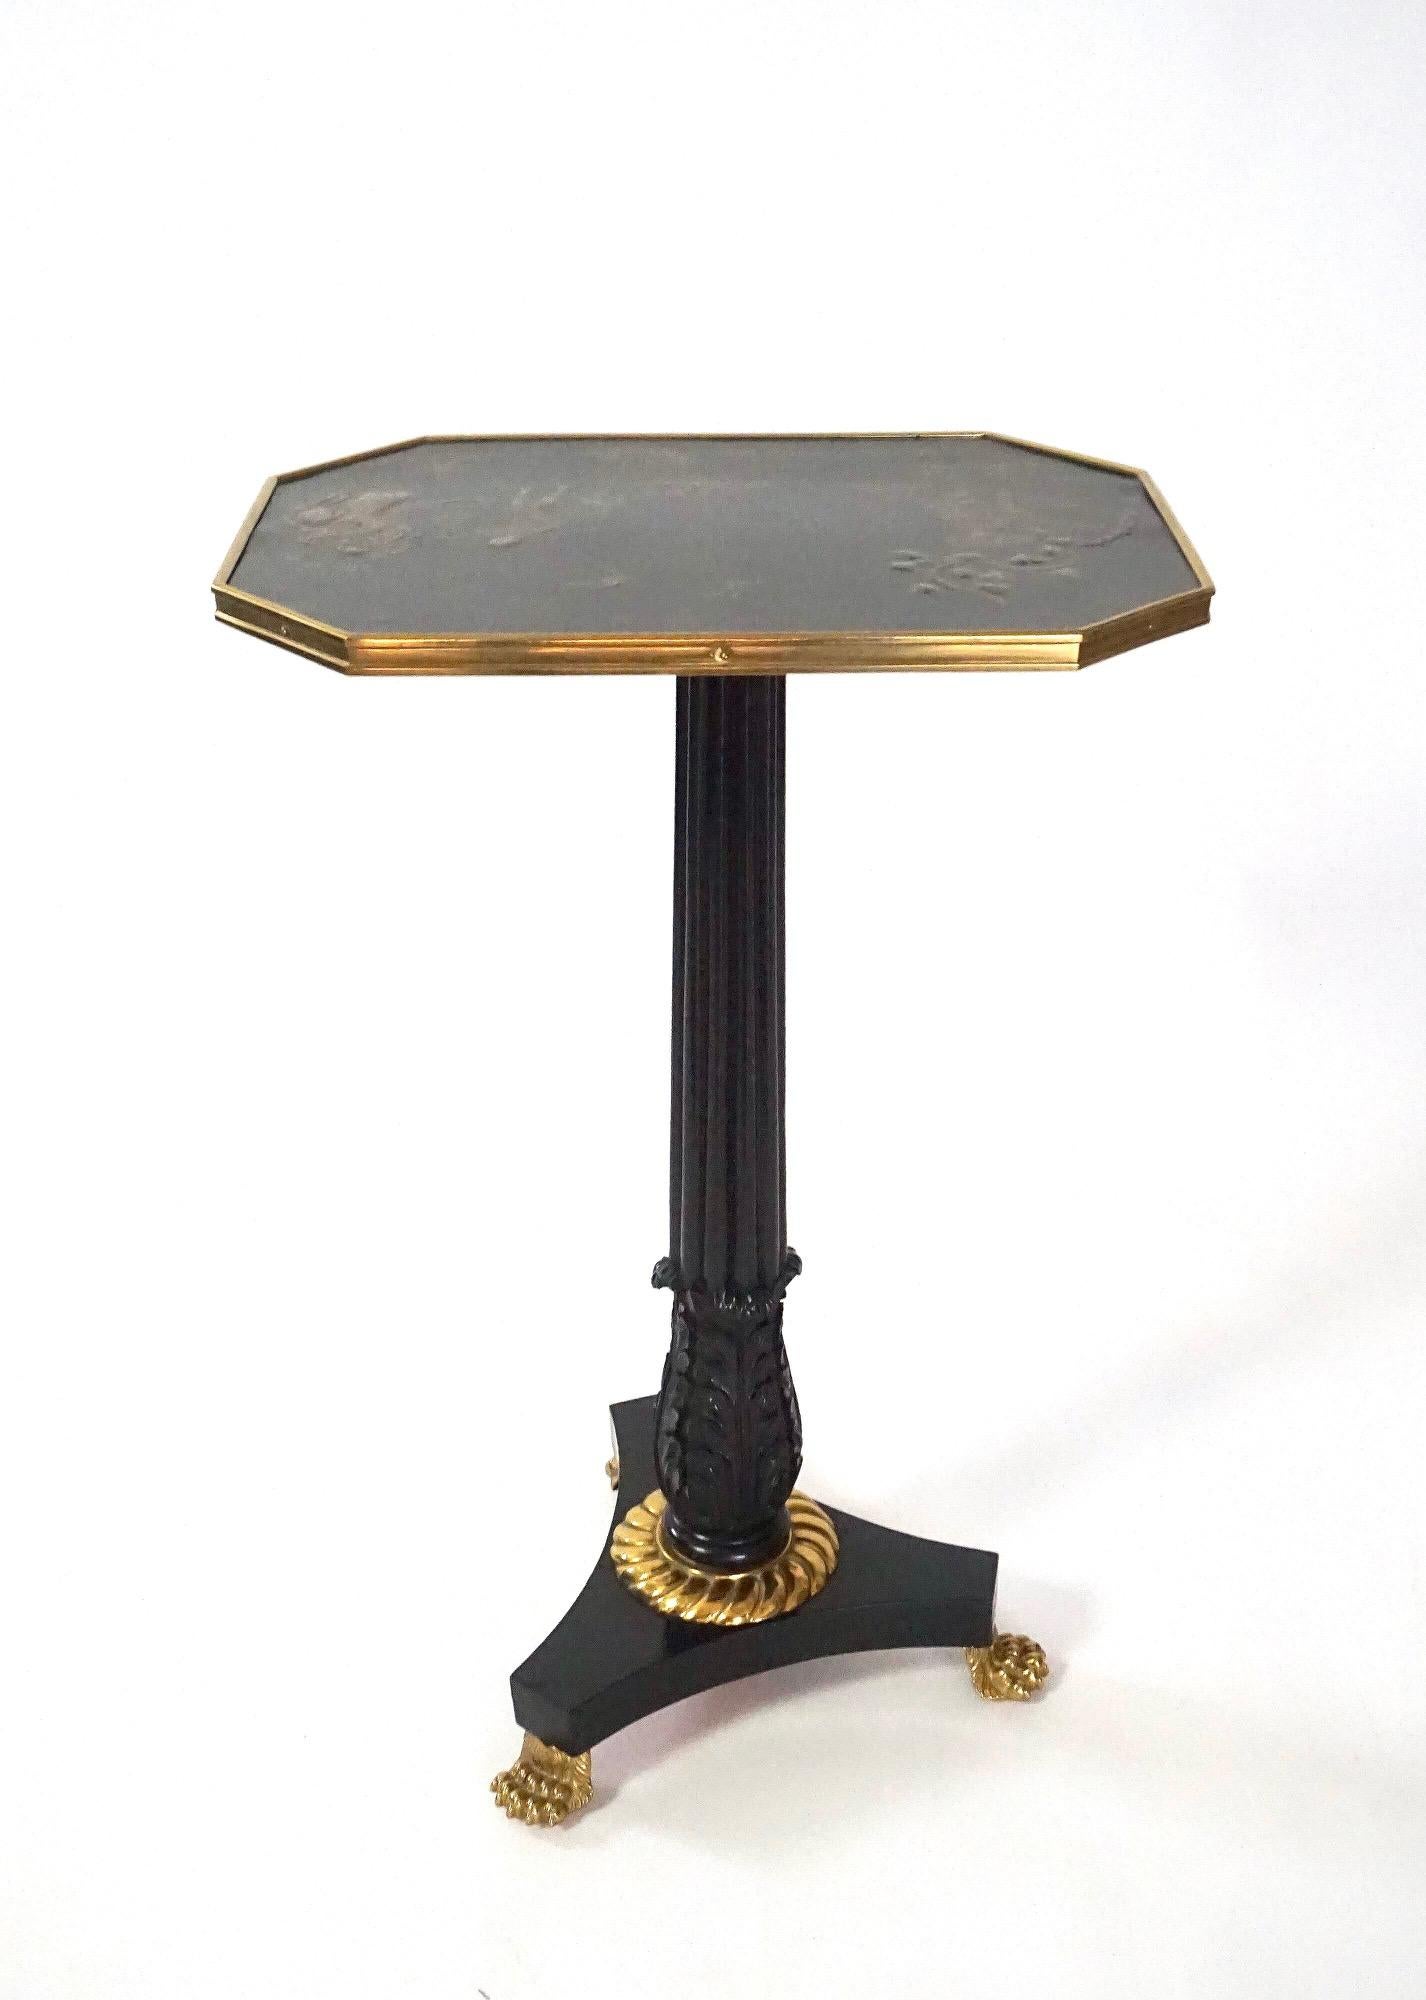 Hand-Painted English Regency Chinoiserie Lacquer Top Ebonized Brass Mounted Stand, circa 1820 For Sale